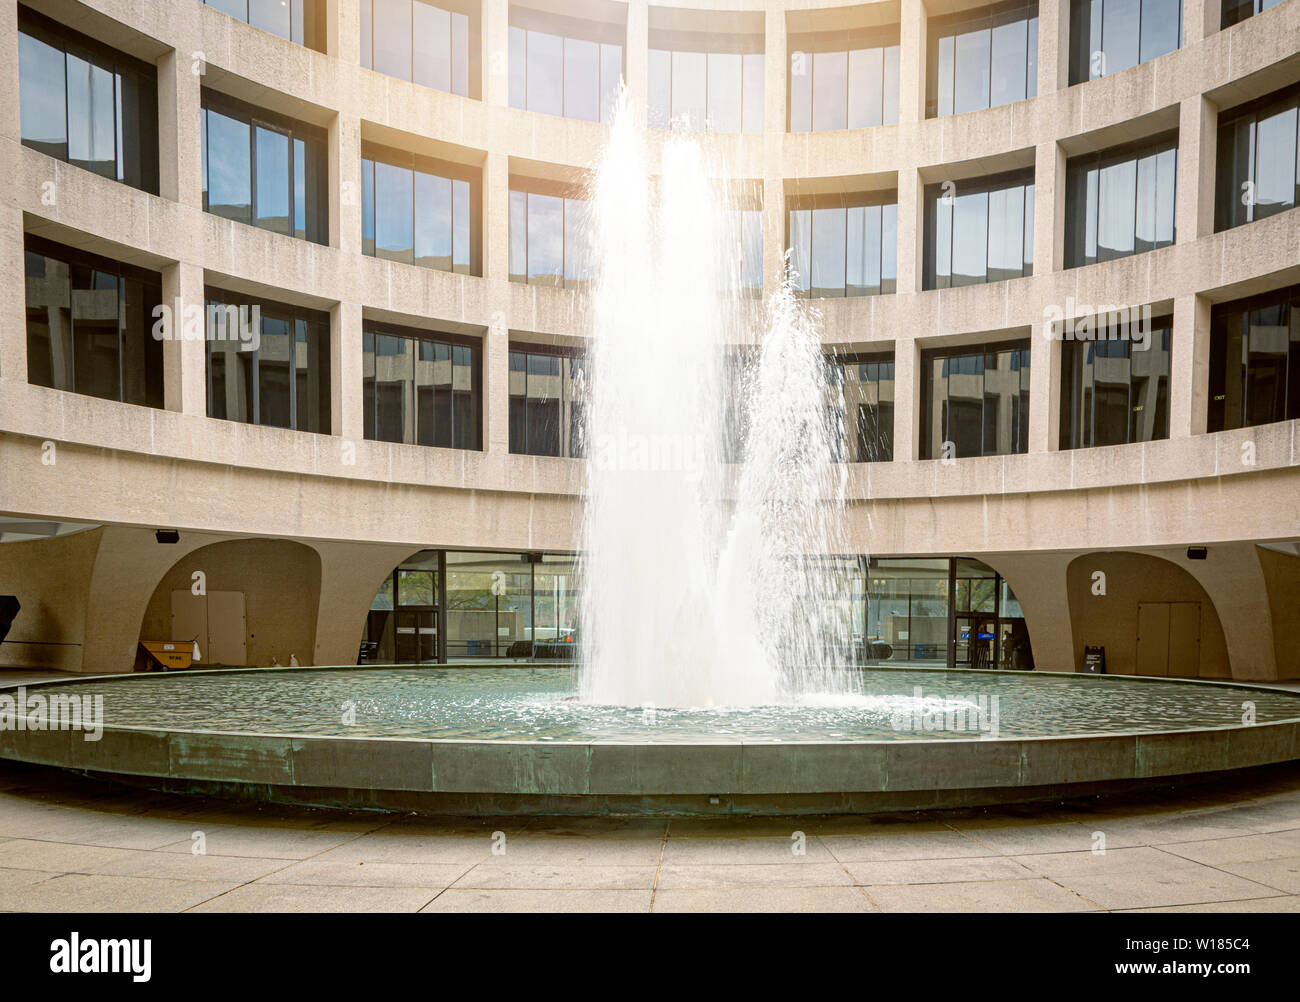 Washington D.C., USA, October 2016: water spray from the fountain inside the courtyard of the Hirshhorn Museum in Washington D.C. Stock Photo